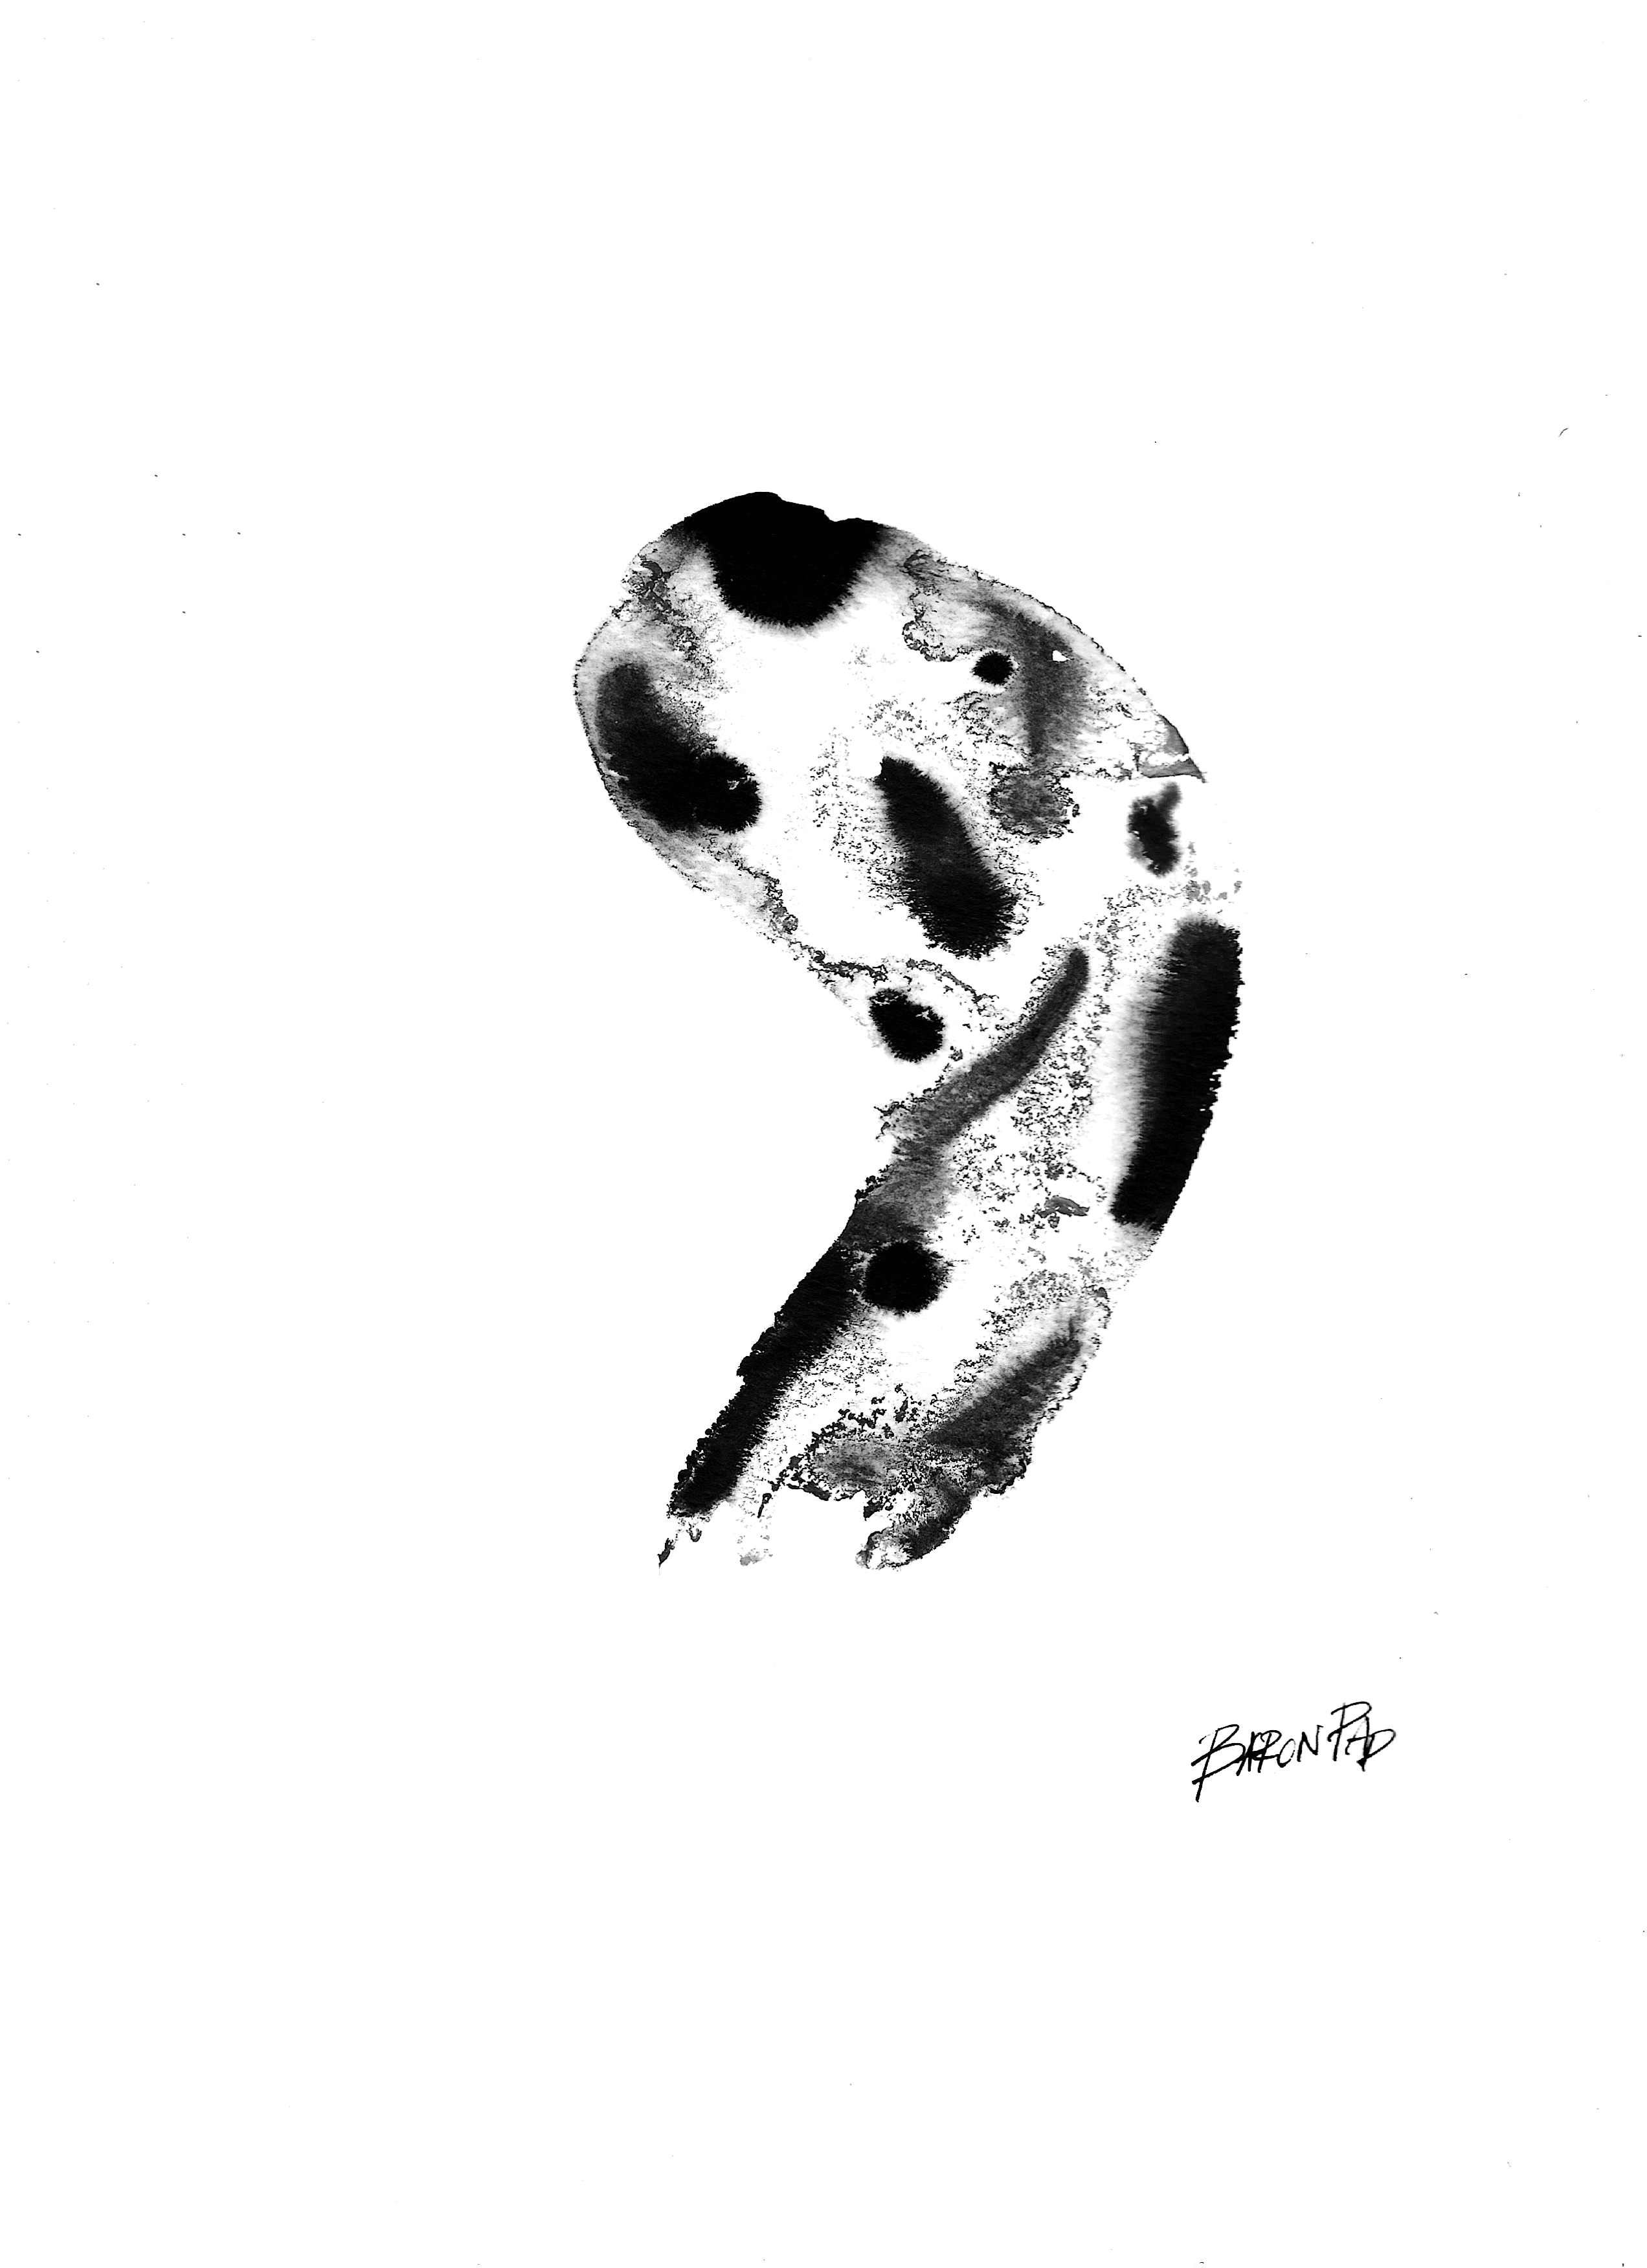 Falling of a drop, ink and water on paper #5